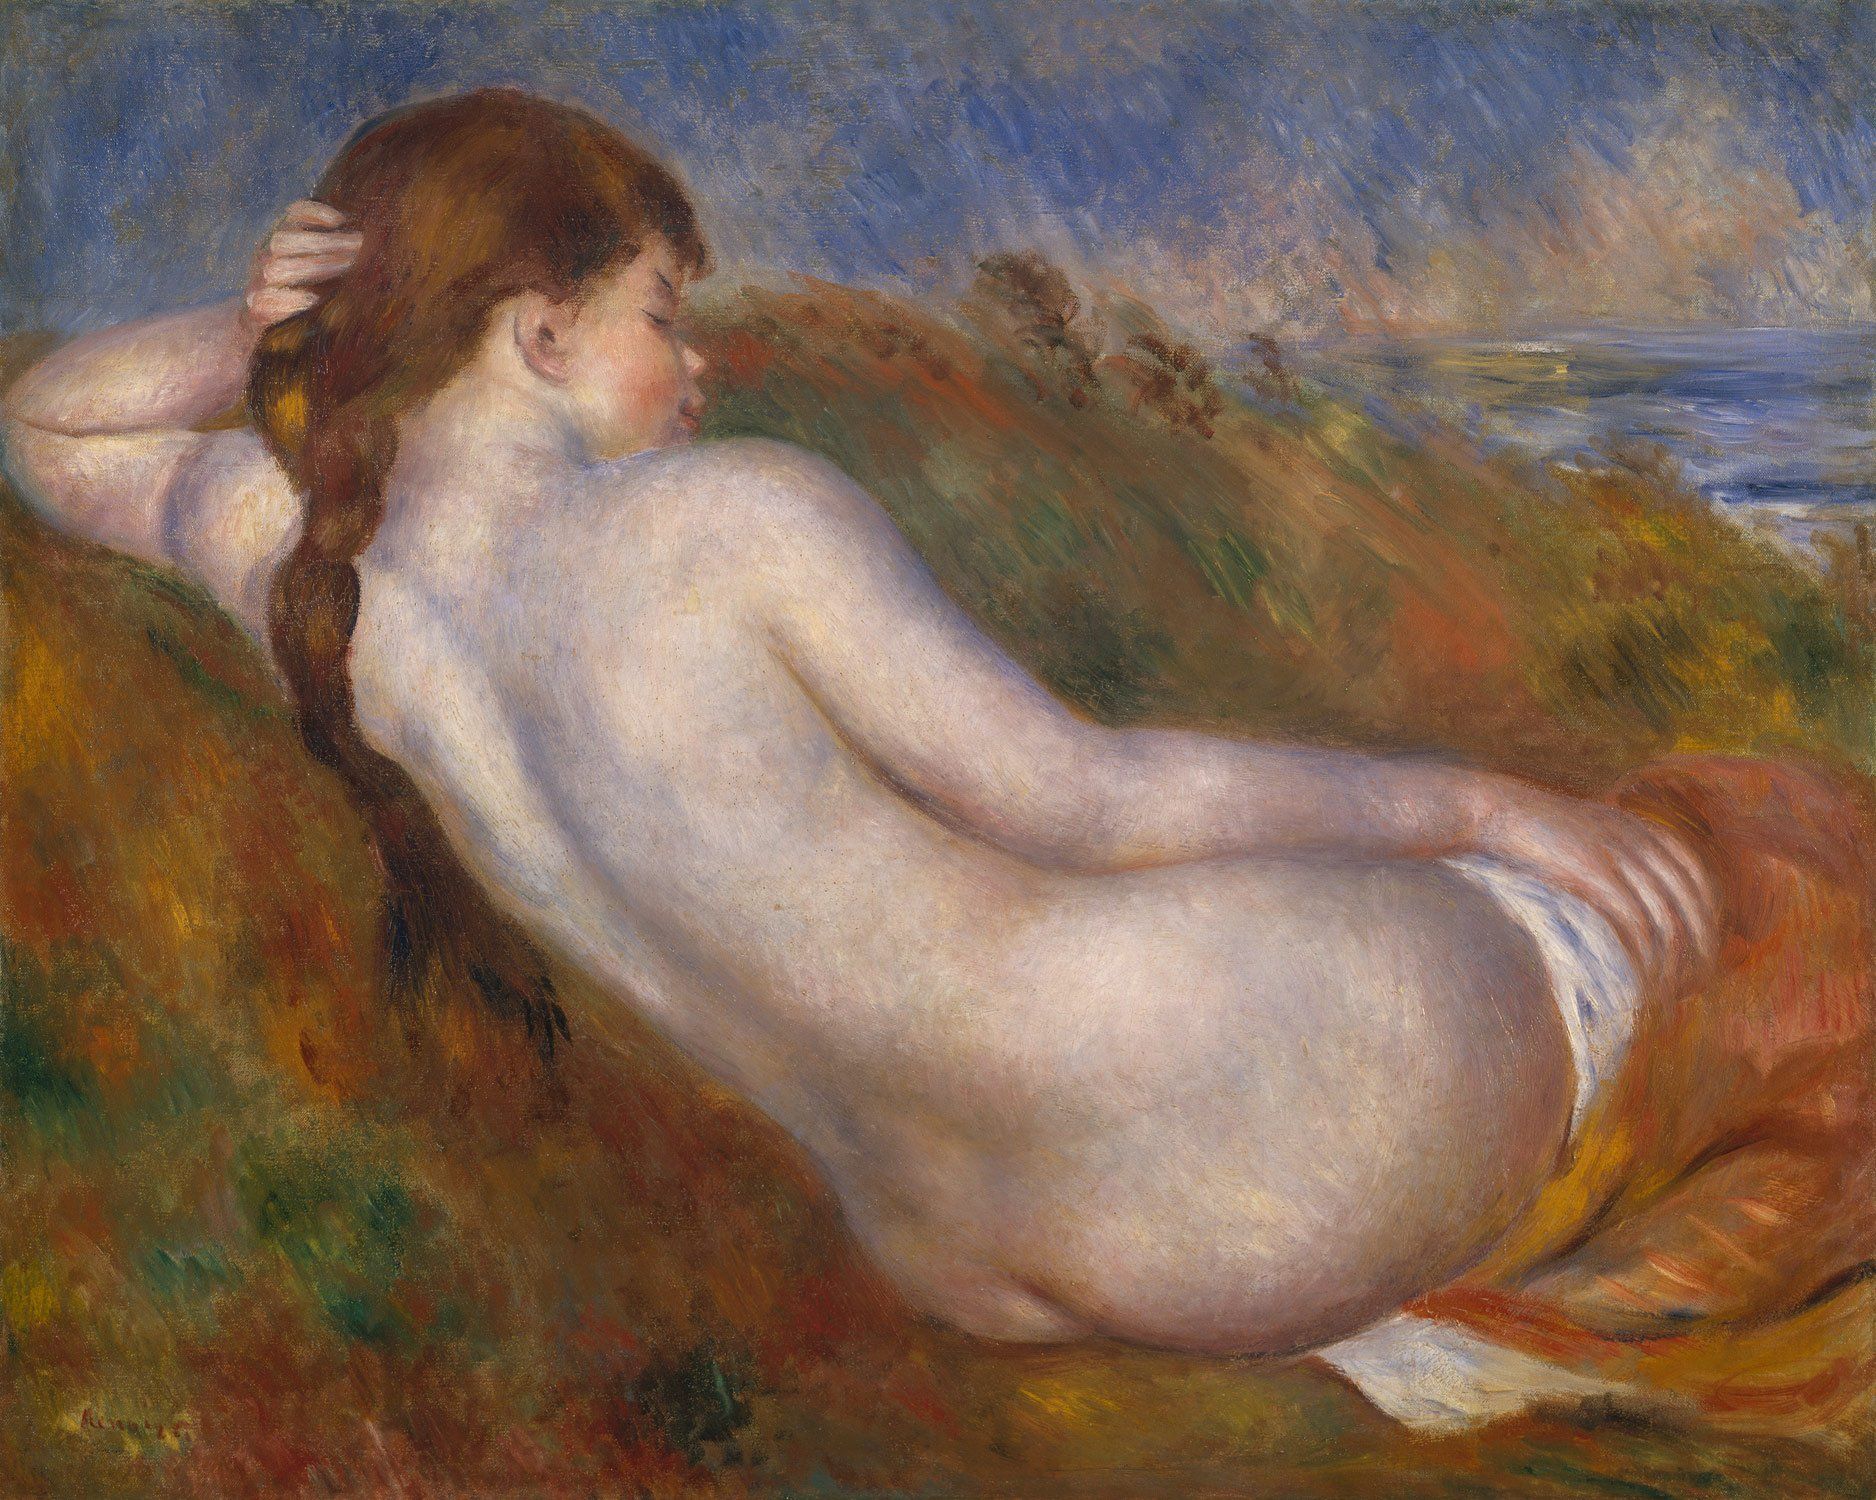 Nudist paintings of the early 1900s